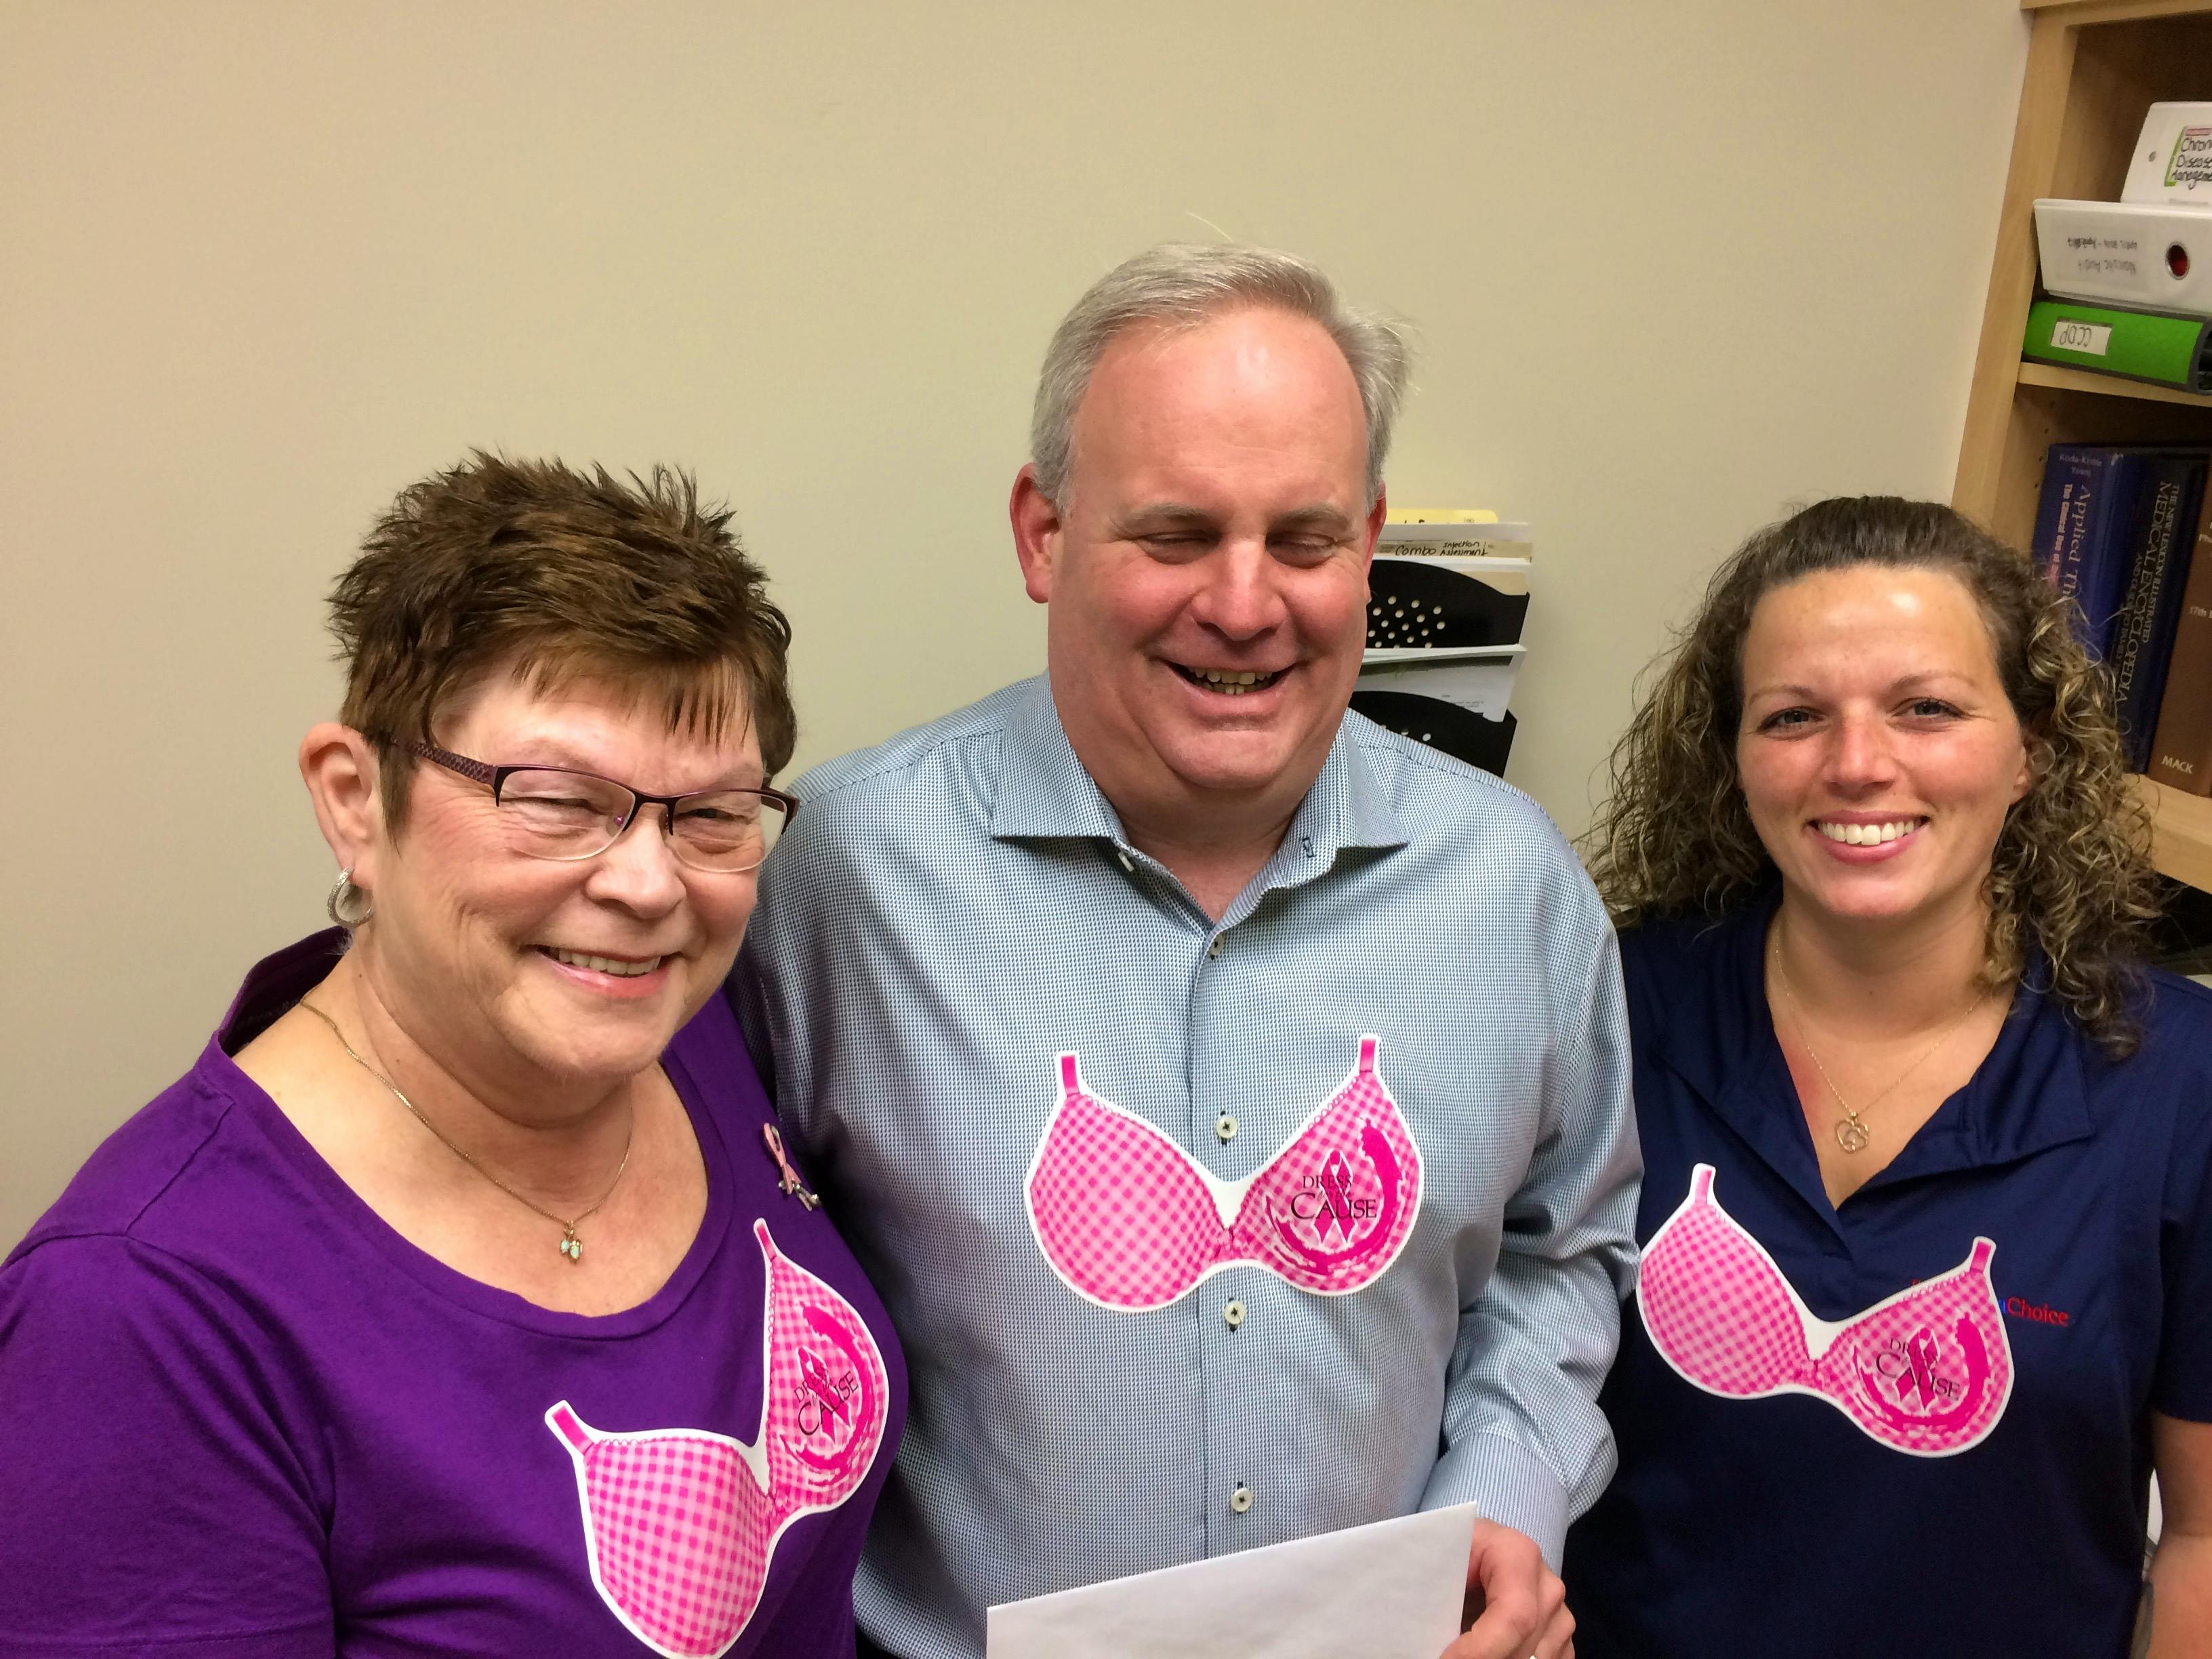 The right fit: Greenwood, NS 'Bra Doctor' named one of Top 5 lingerie  boutiques in North America